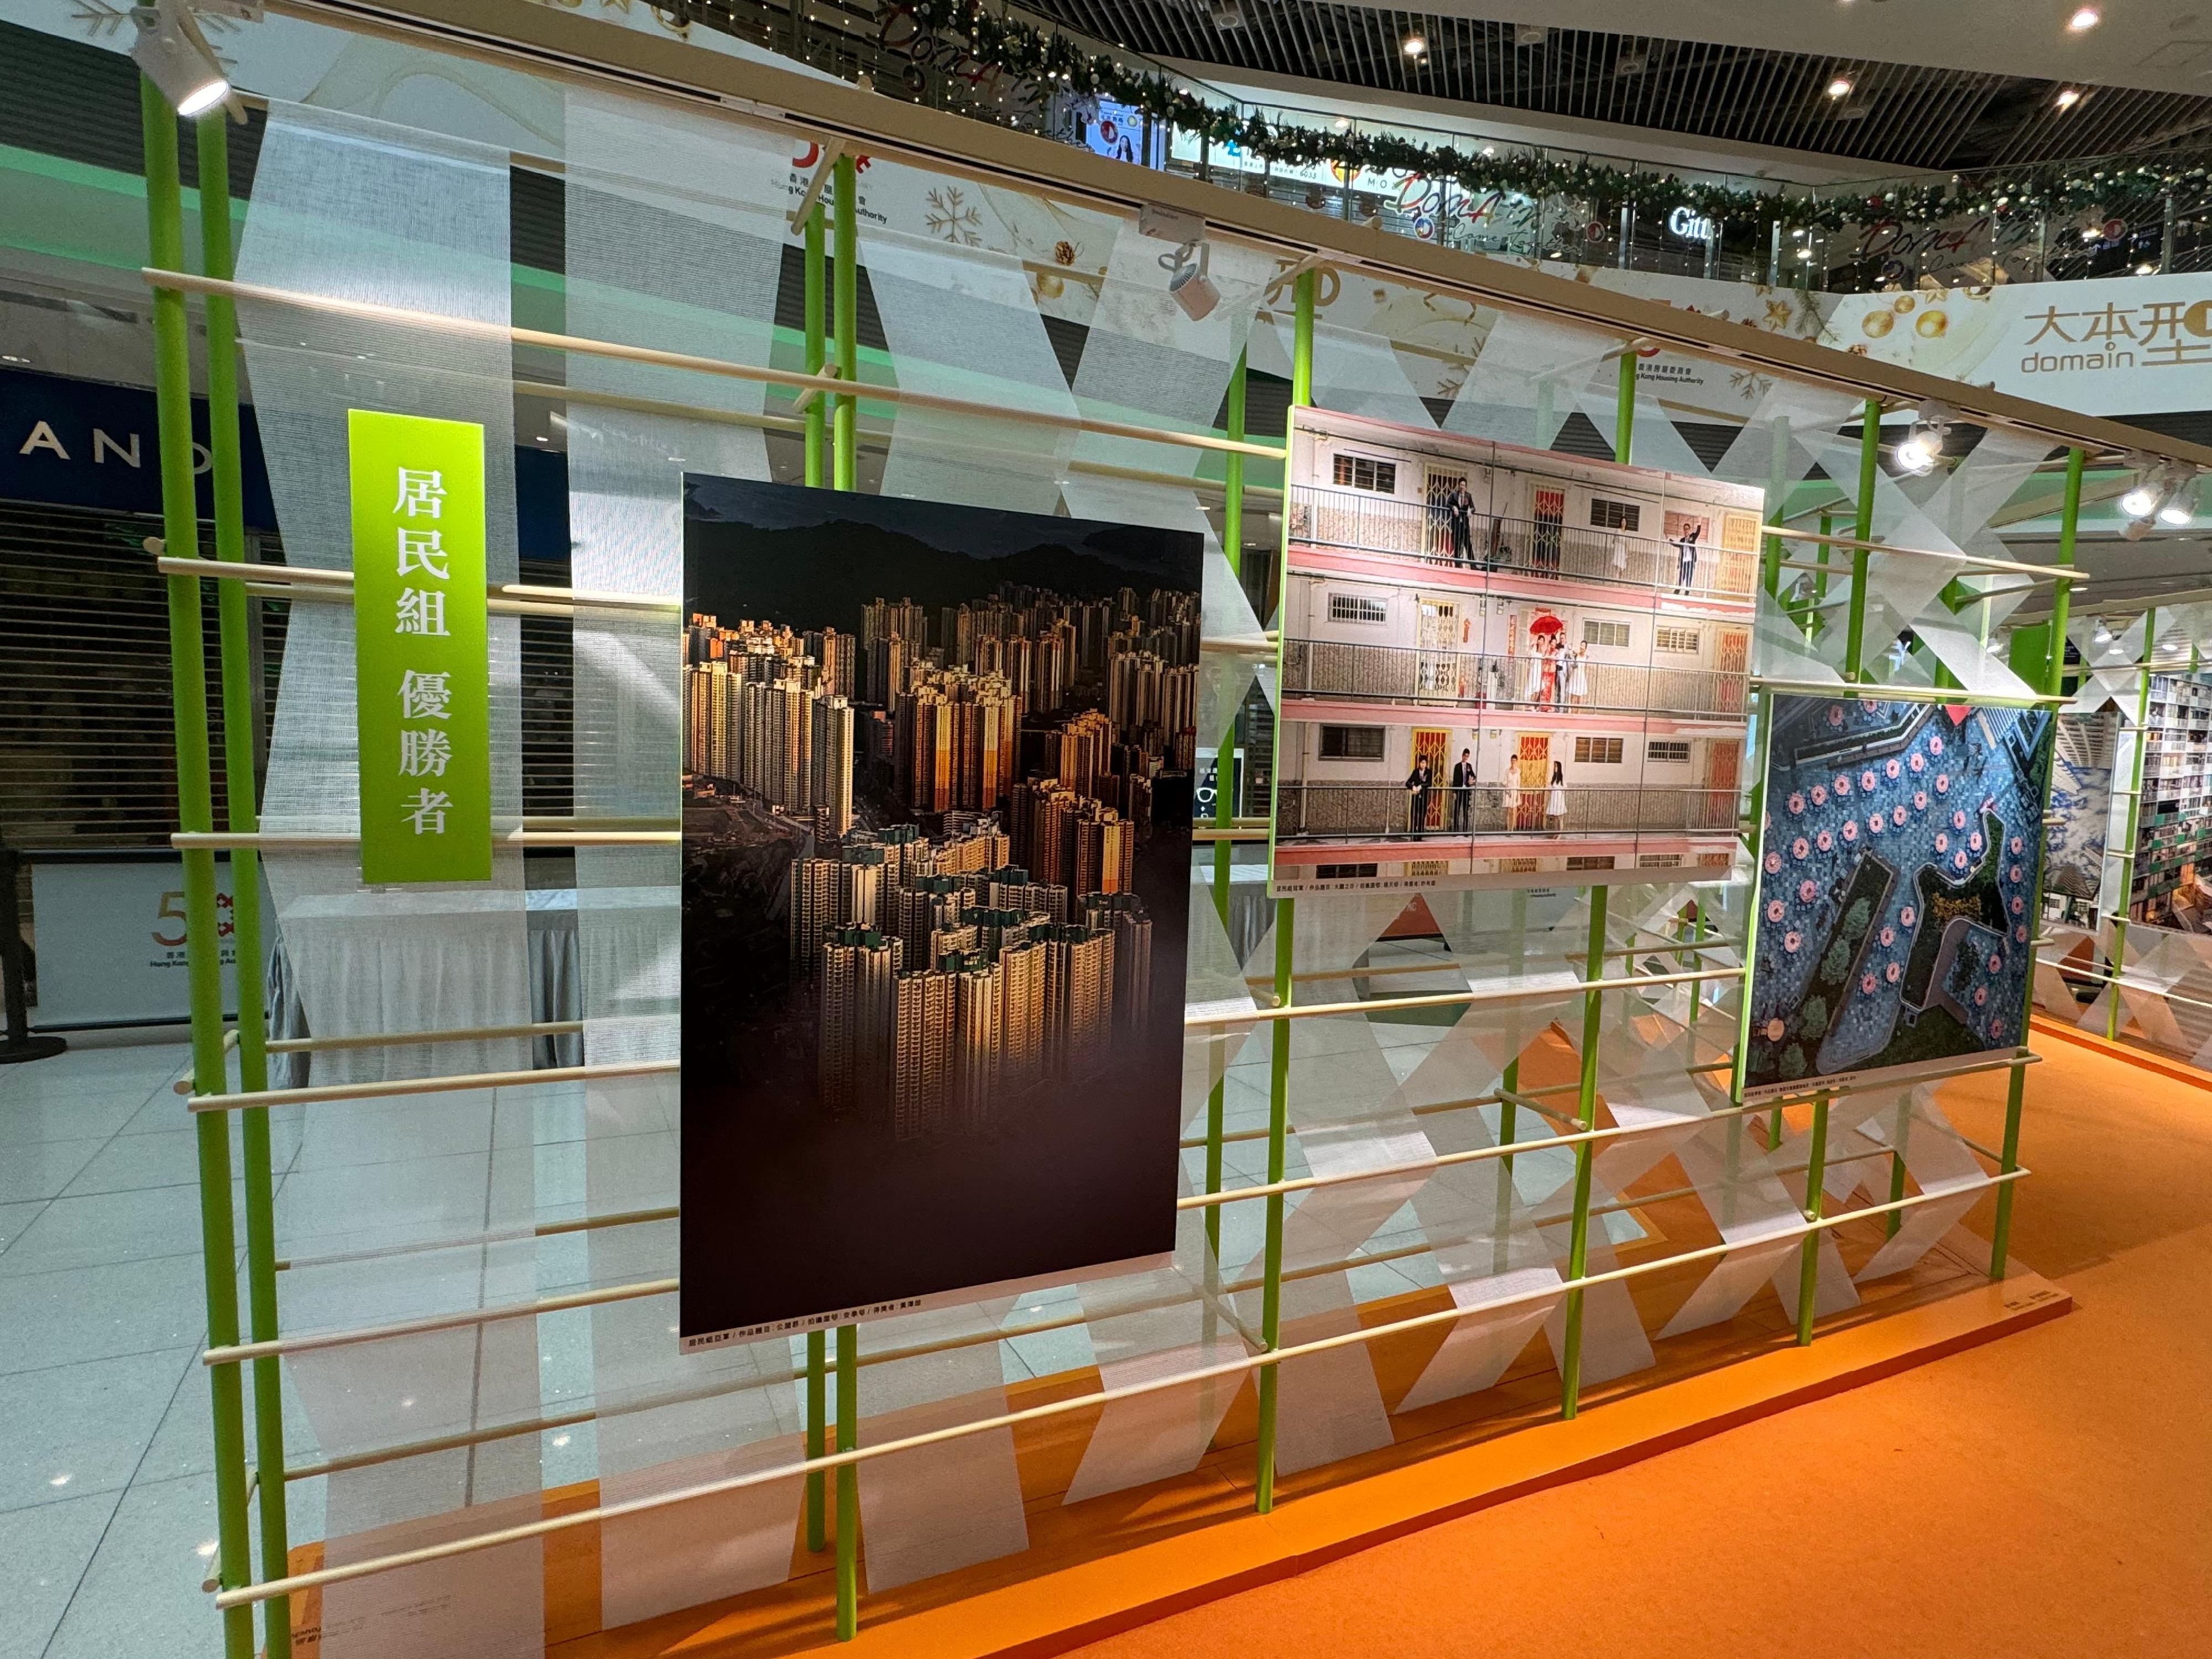 The winning entries of the Hong Kong Housing Authority's 50th Anniversary Photo Contest are on display at the atrium of the Domain shopping mall.